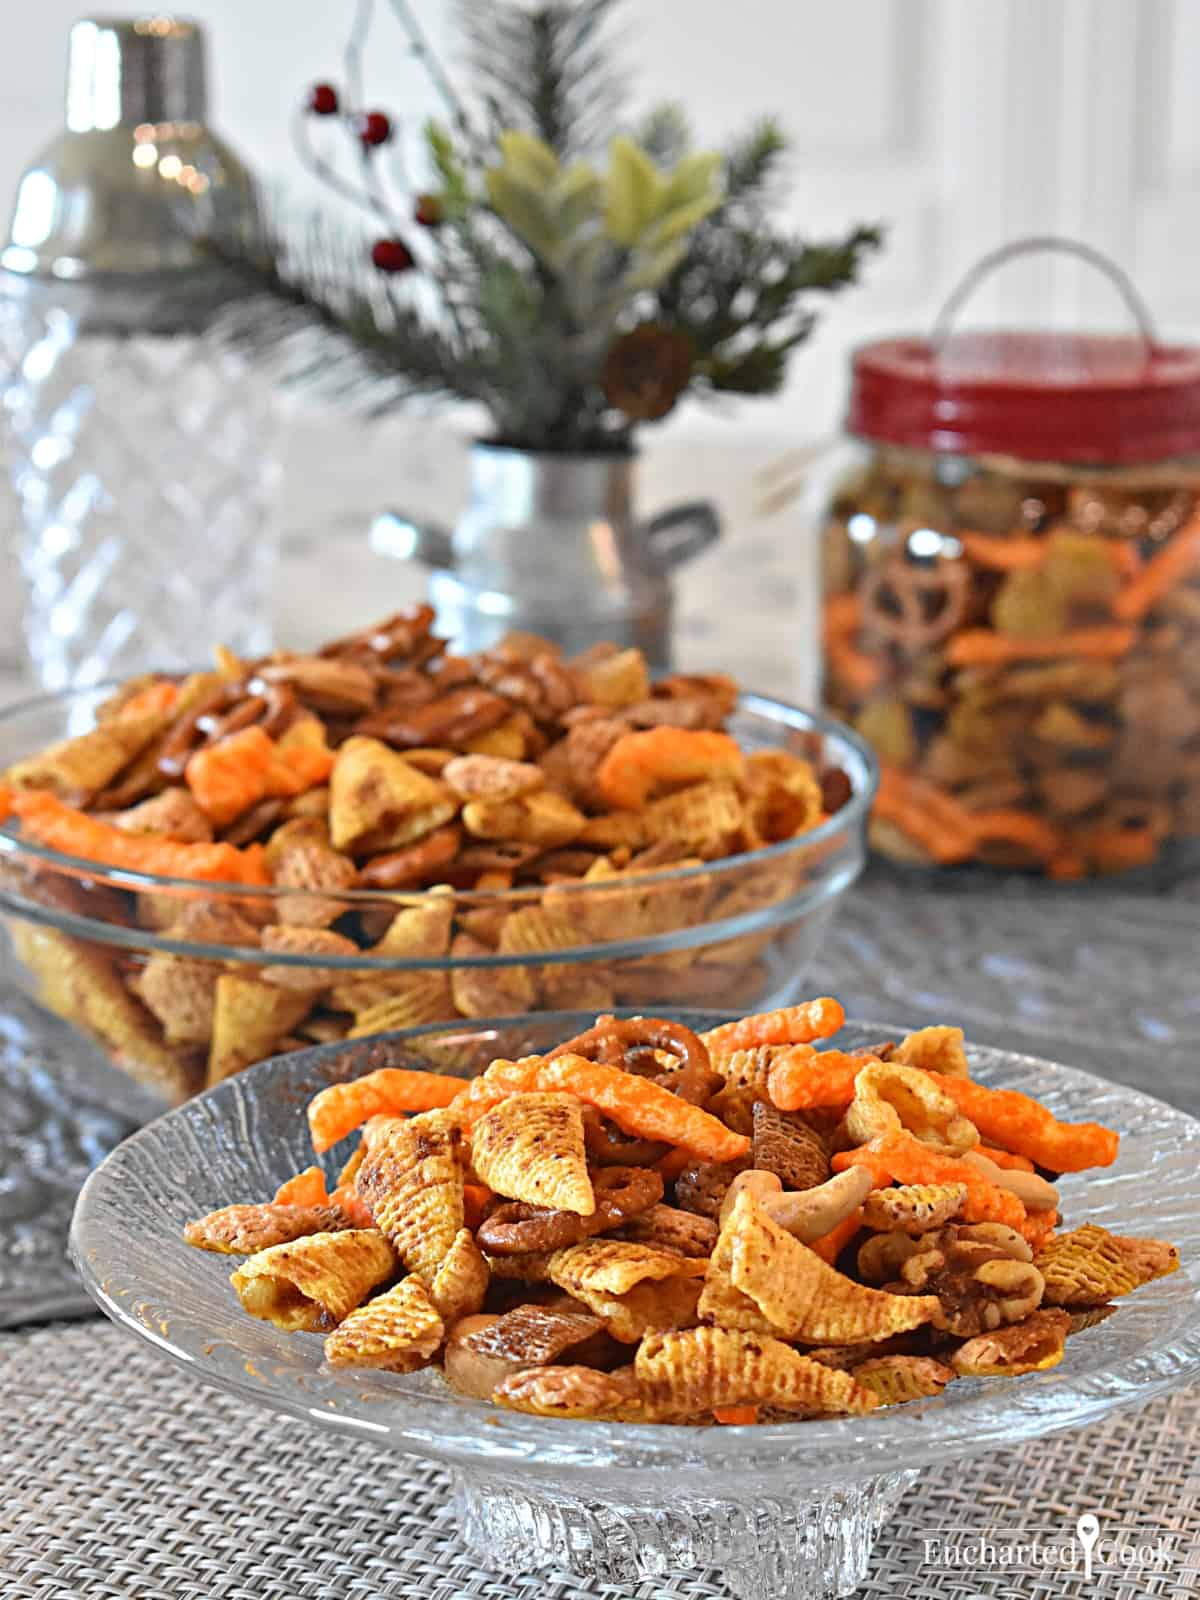 Snack mix in a dish, a bowl and a jar.